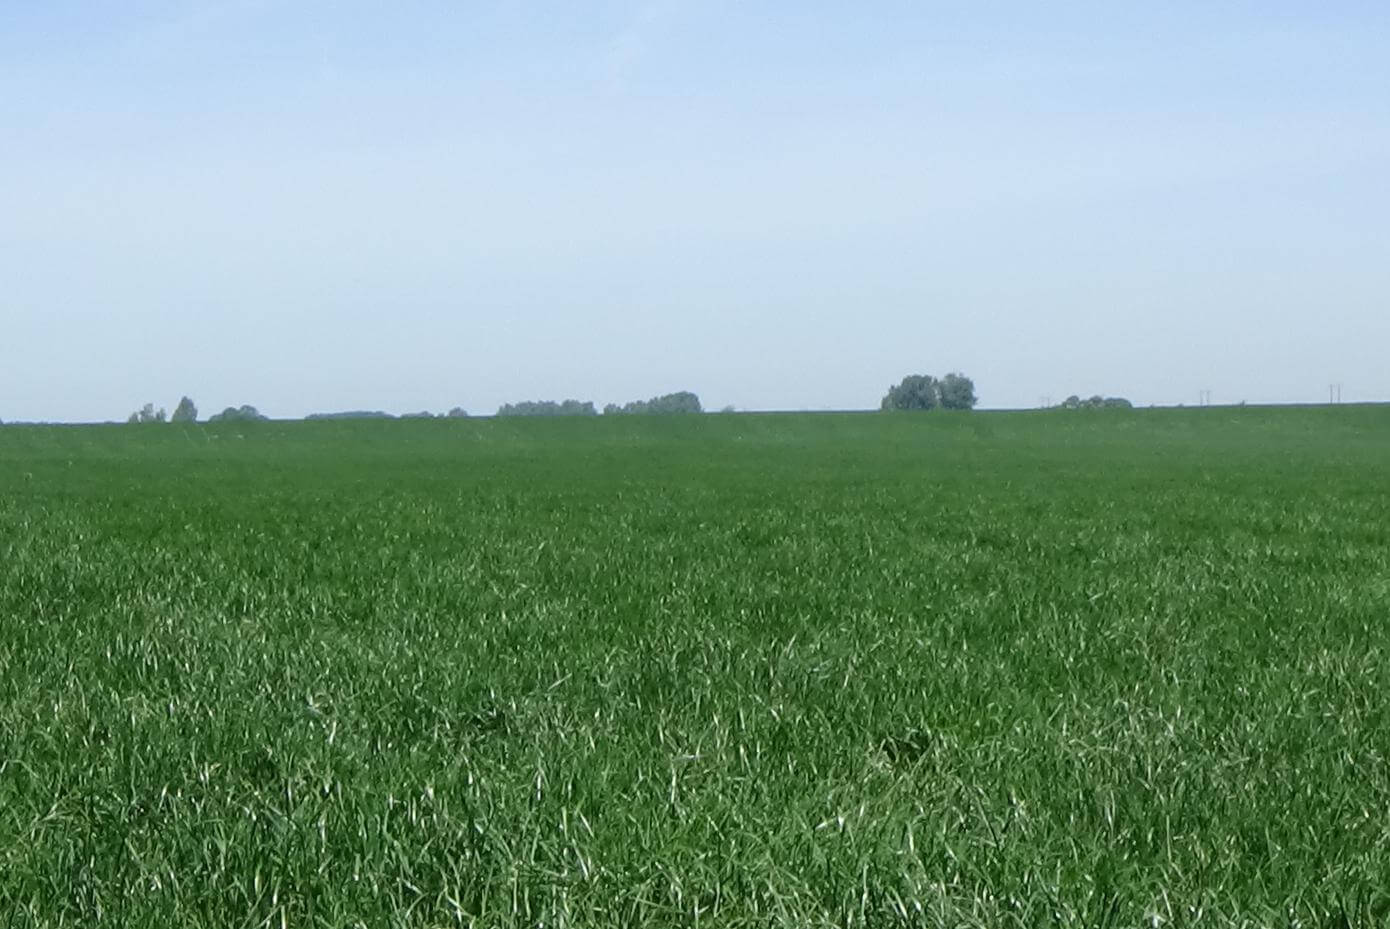 Haven turf-type perennial ryegrass production field